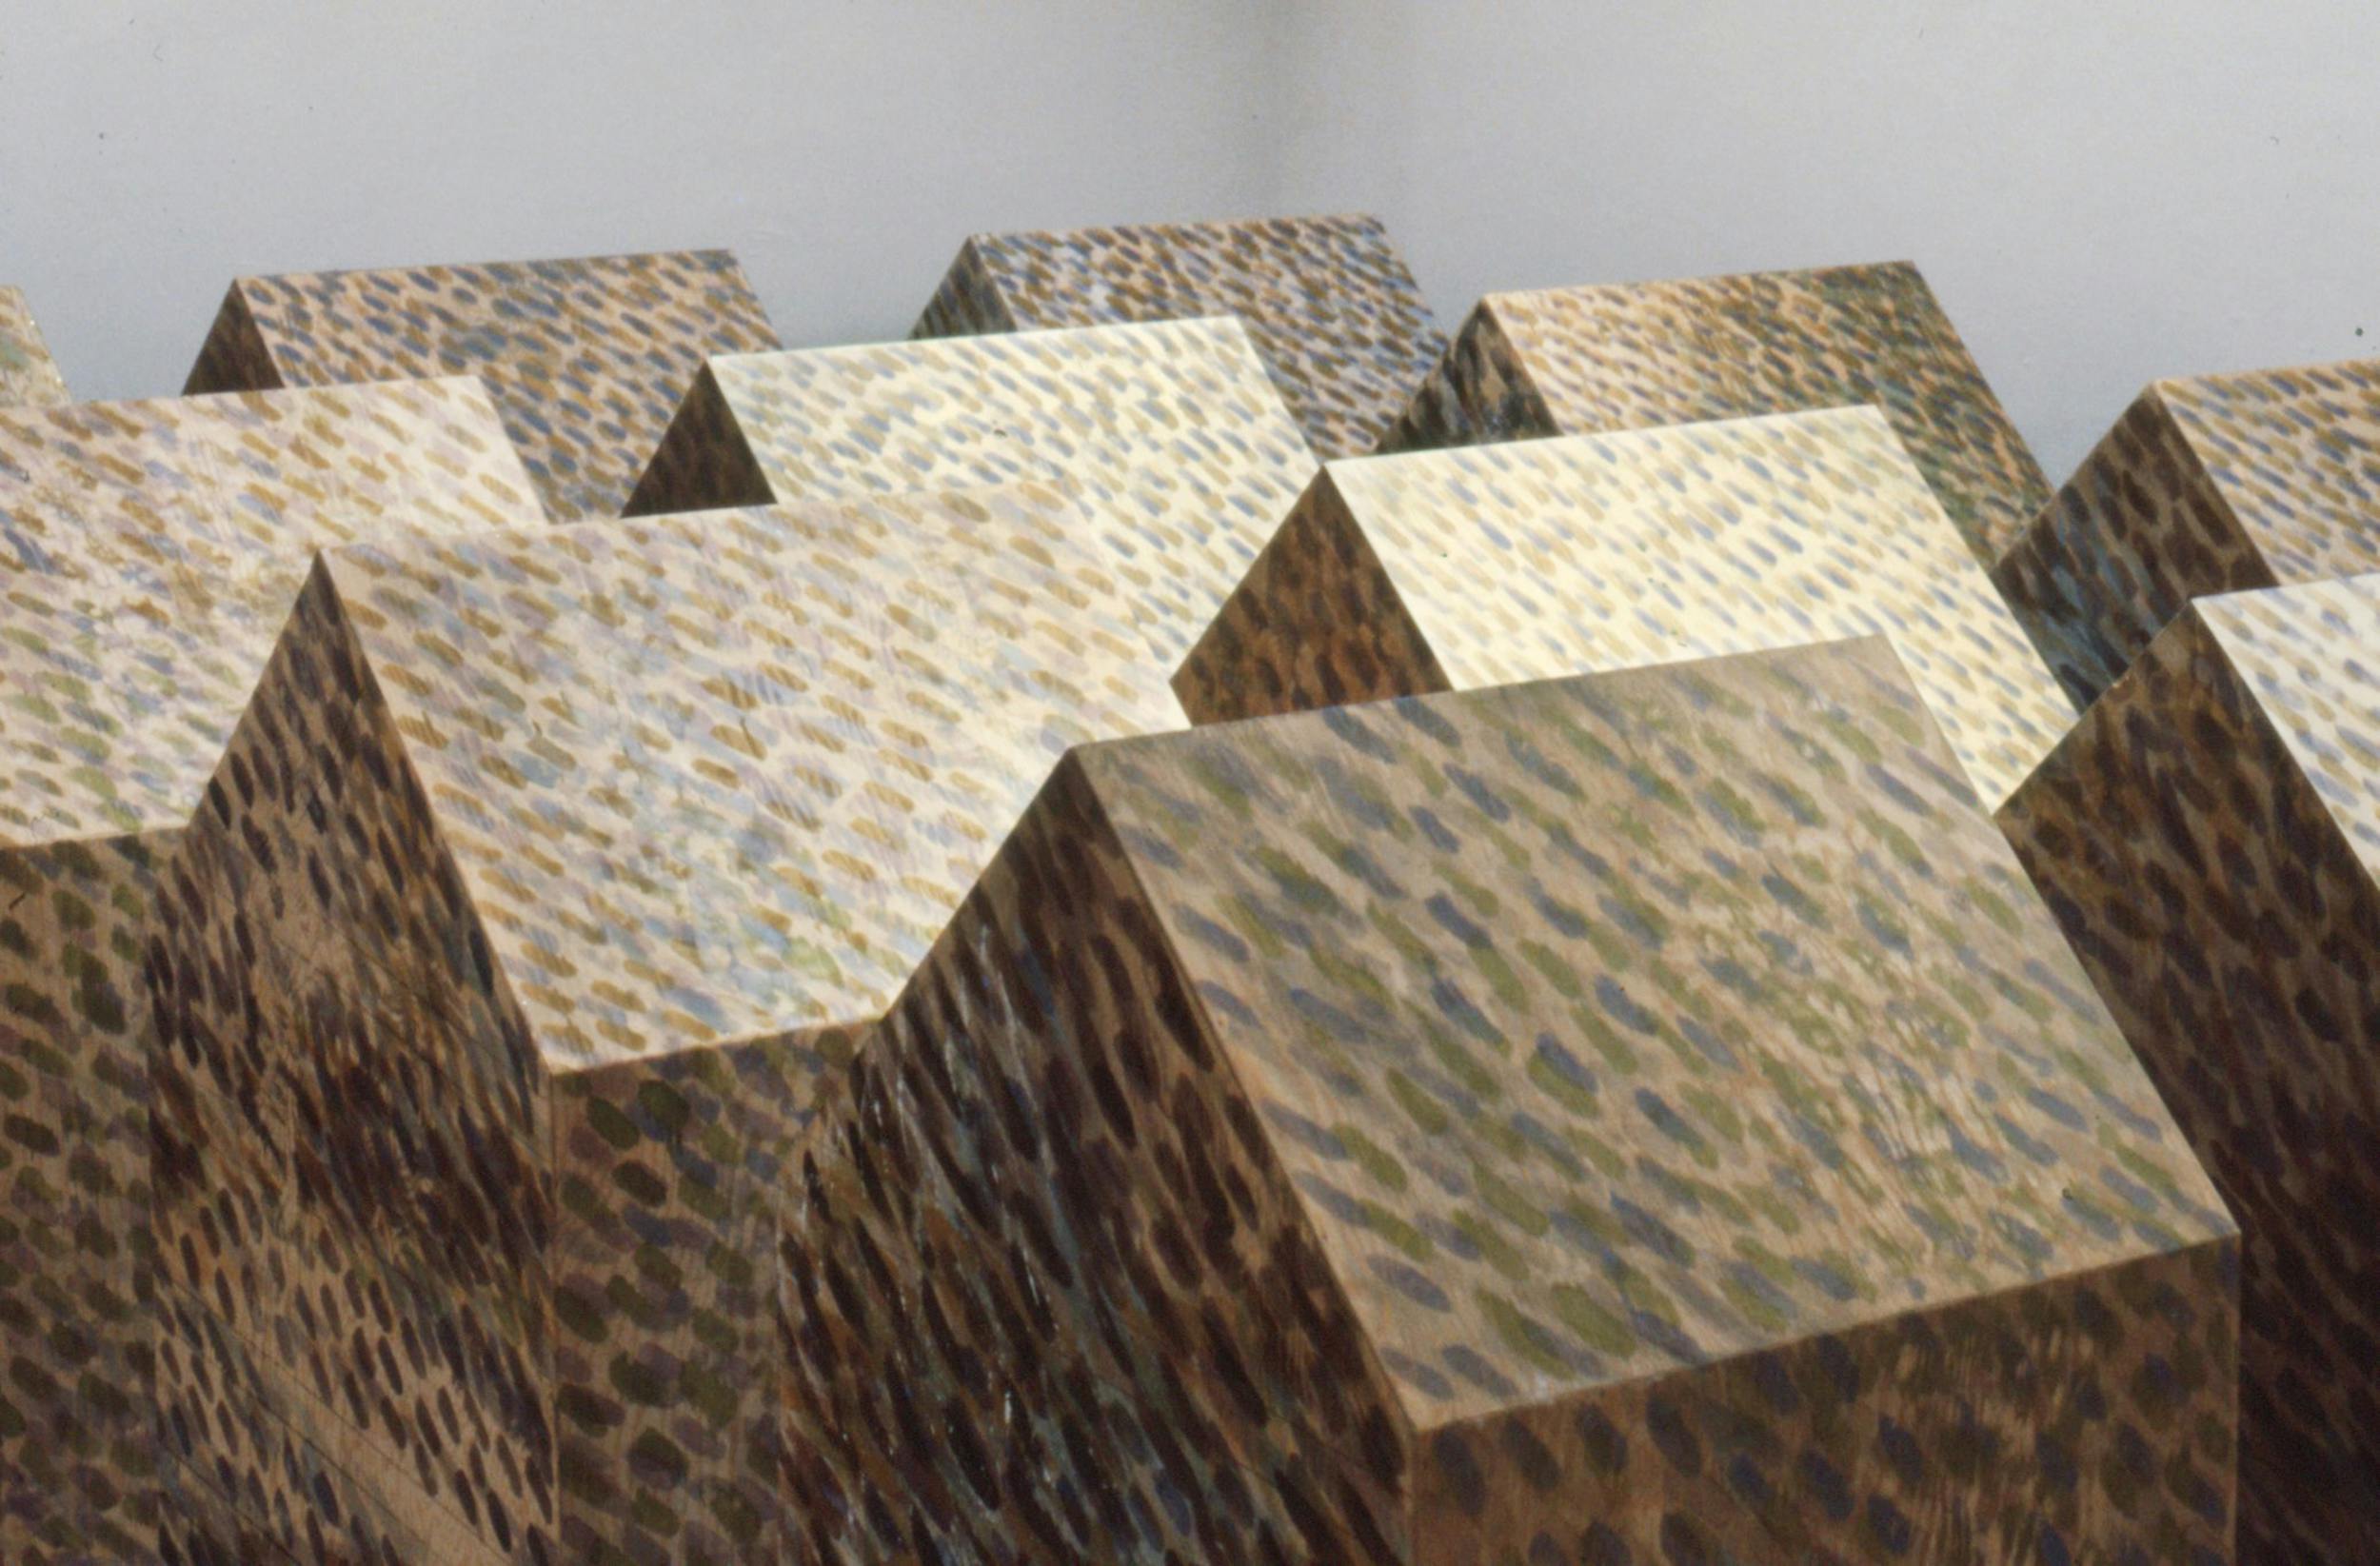 A close up view of wooden sculptures resembling houses are lined up in a gallery. The sculptures are painted with small colourful brush strokes.